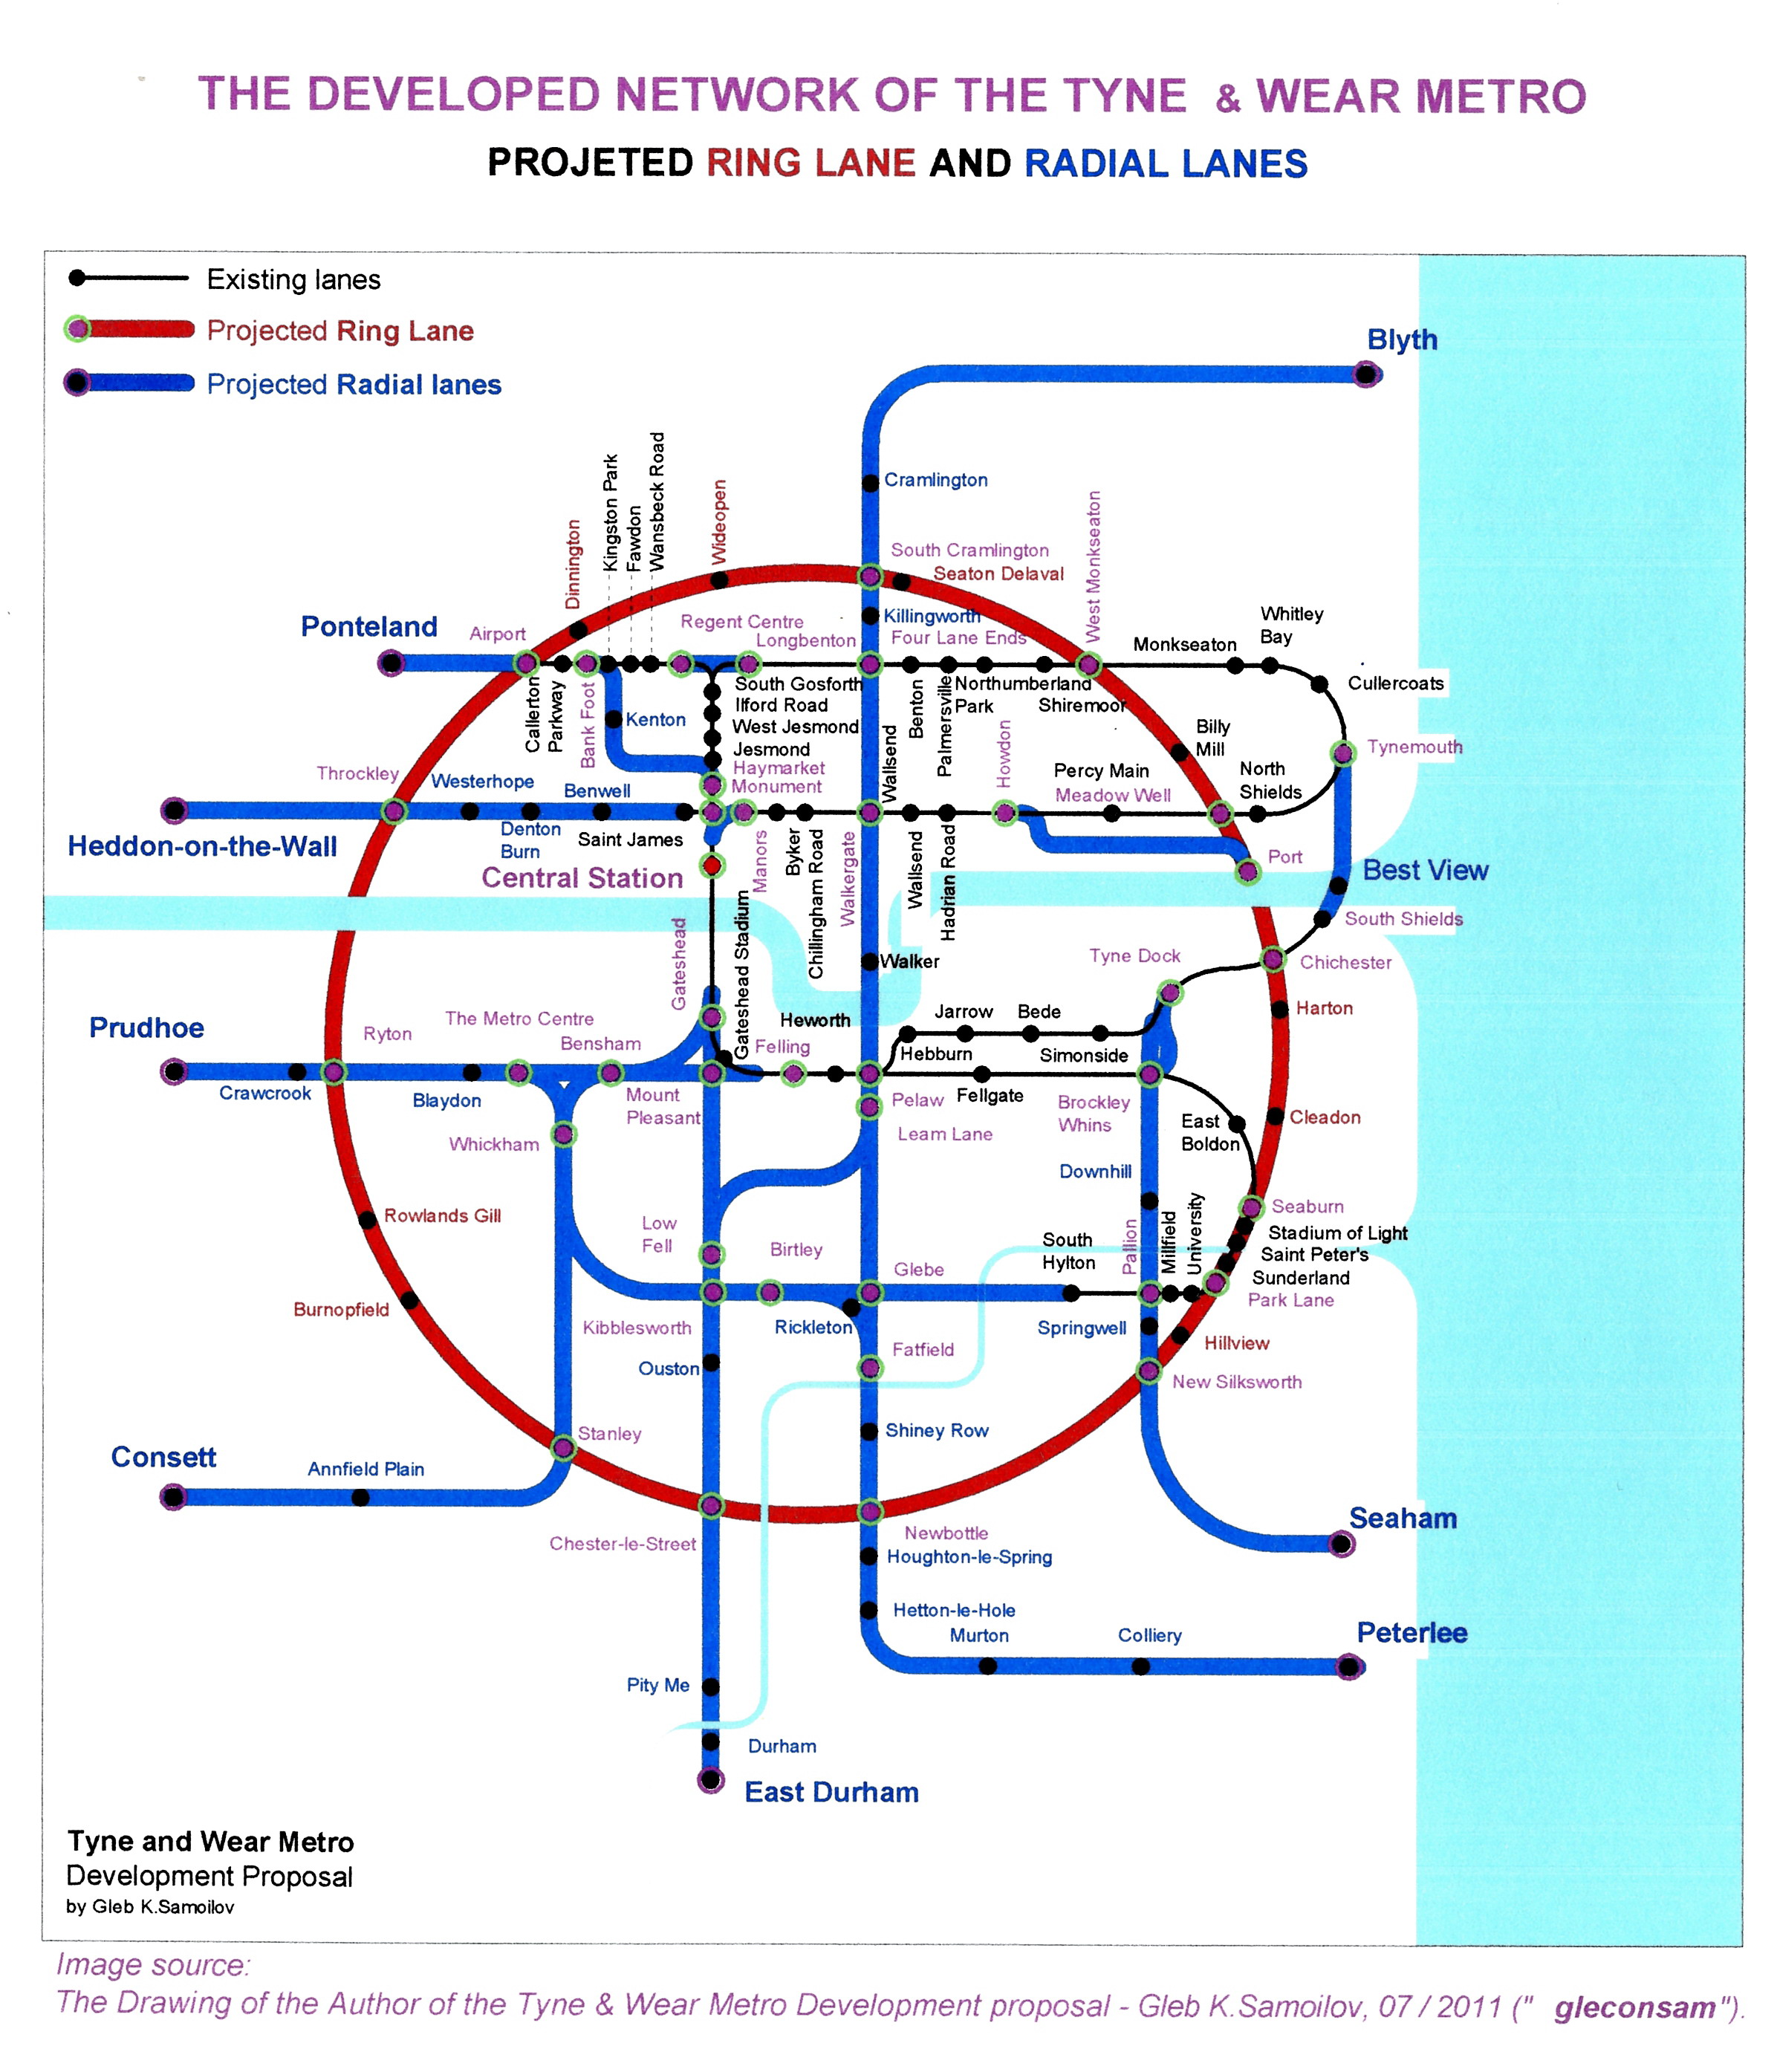 The Tyne and Wear Metro. The Conception of the Network Development - 2011